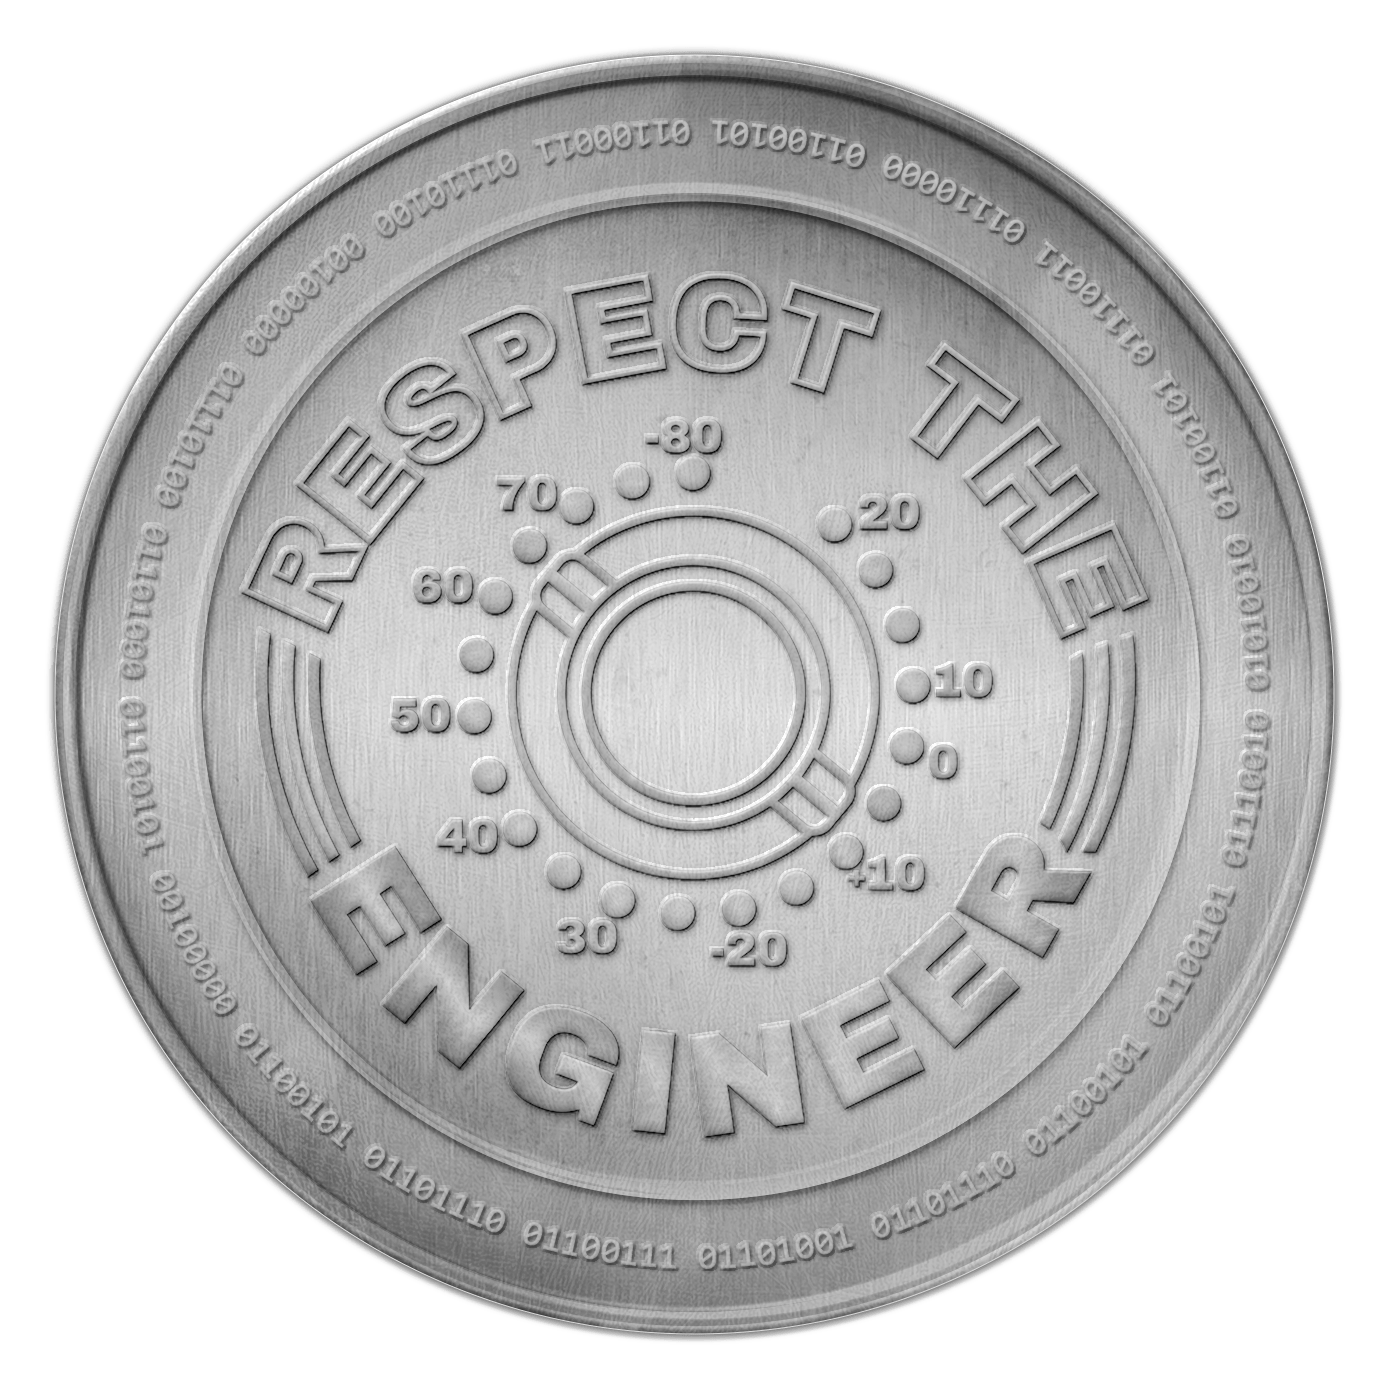 Respect The Engineer